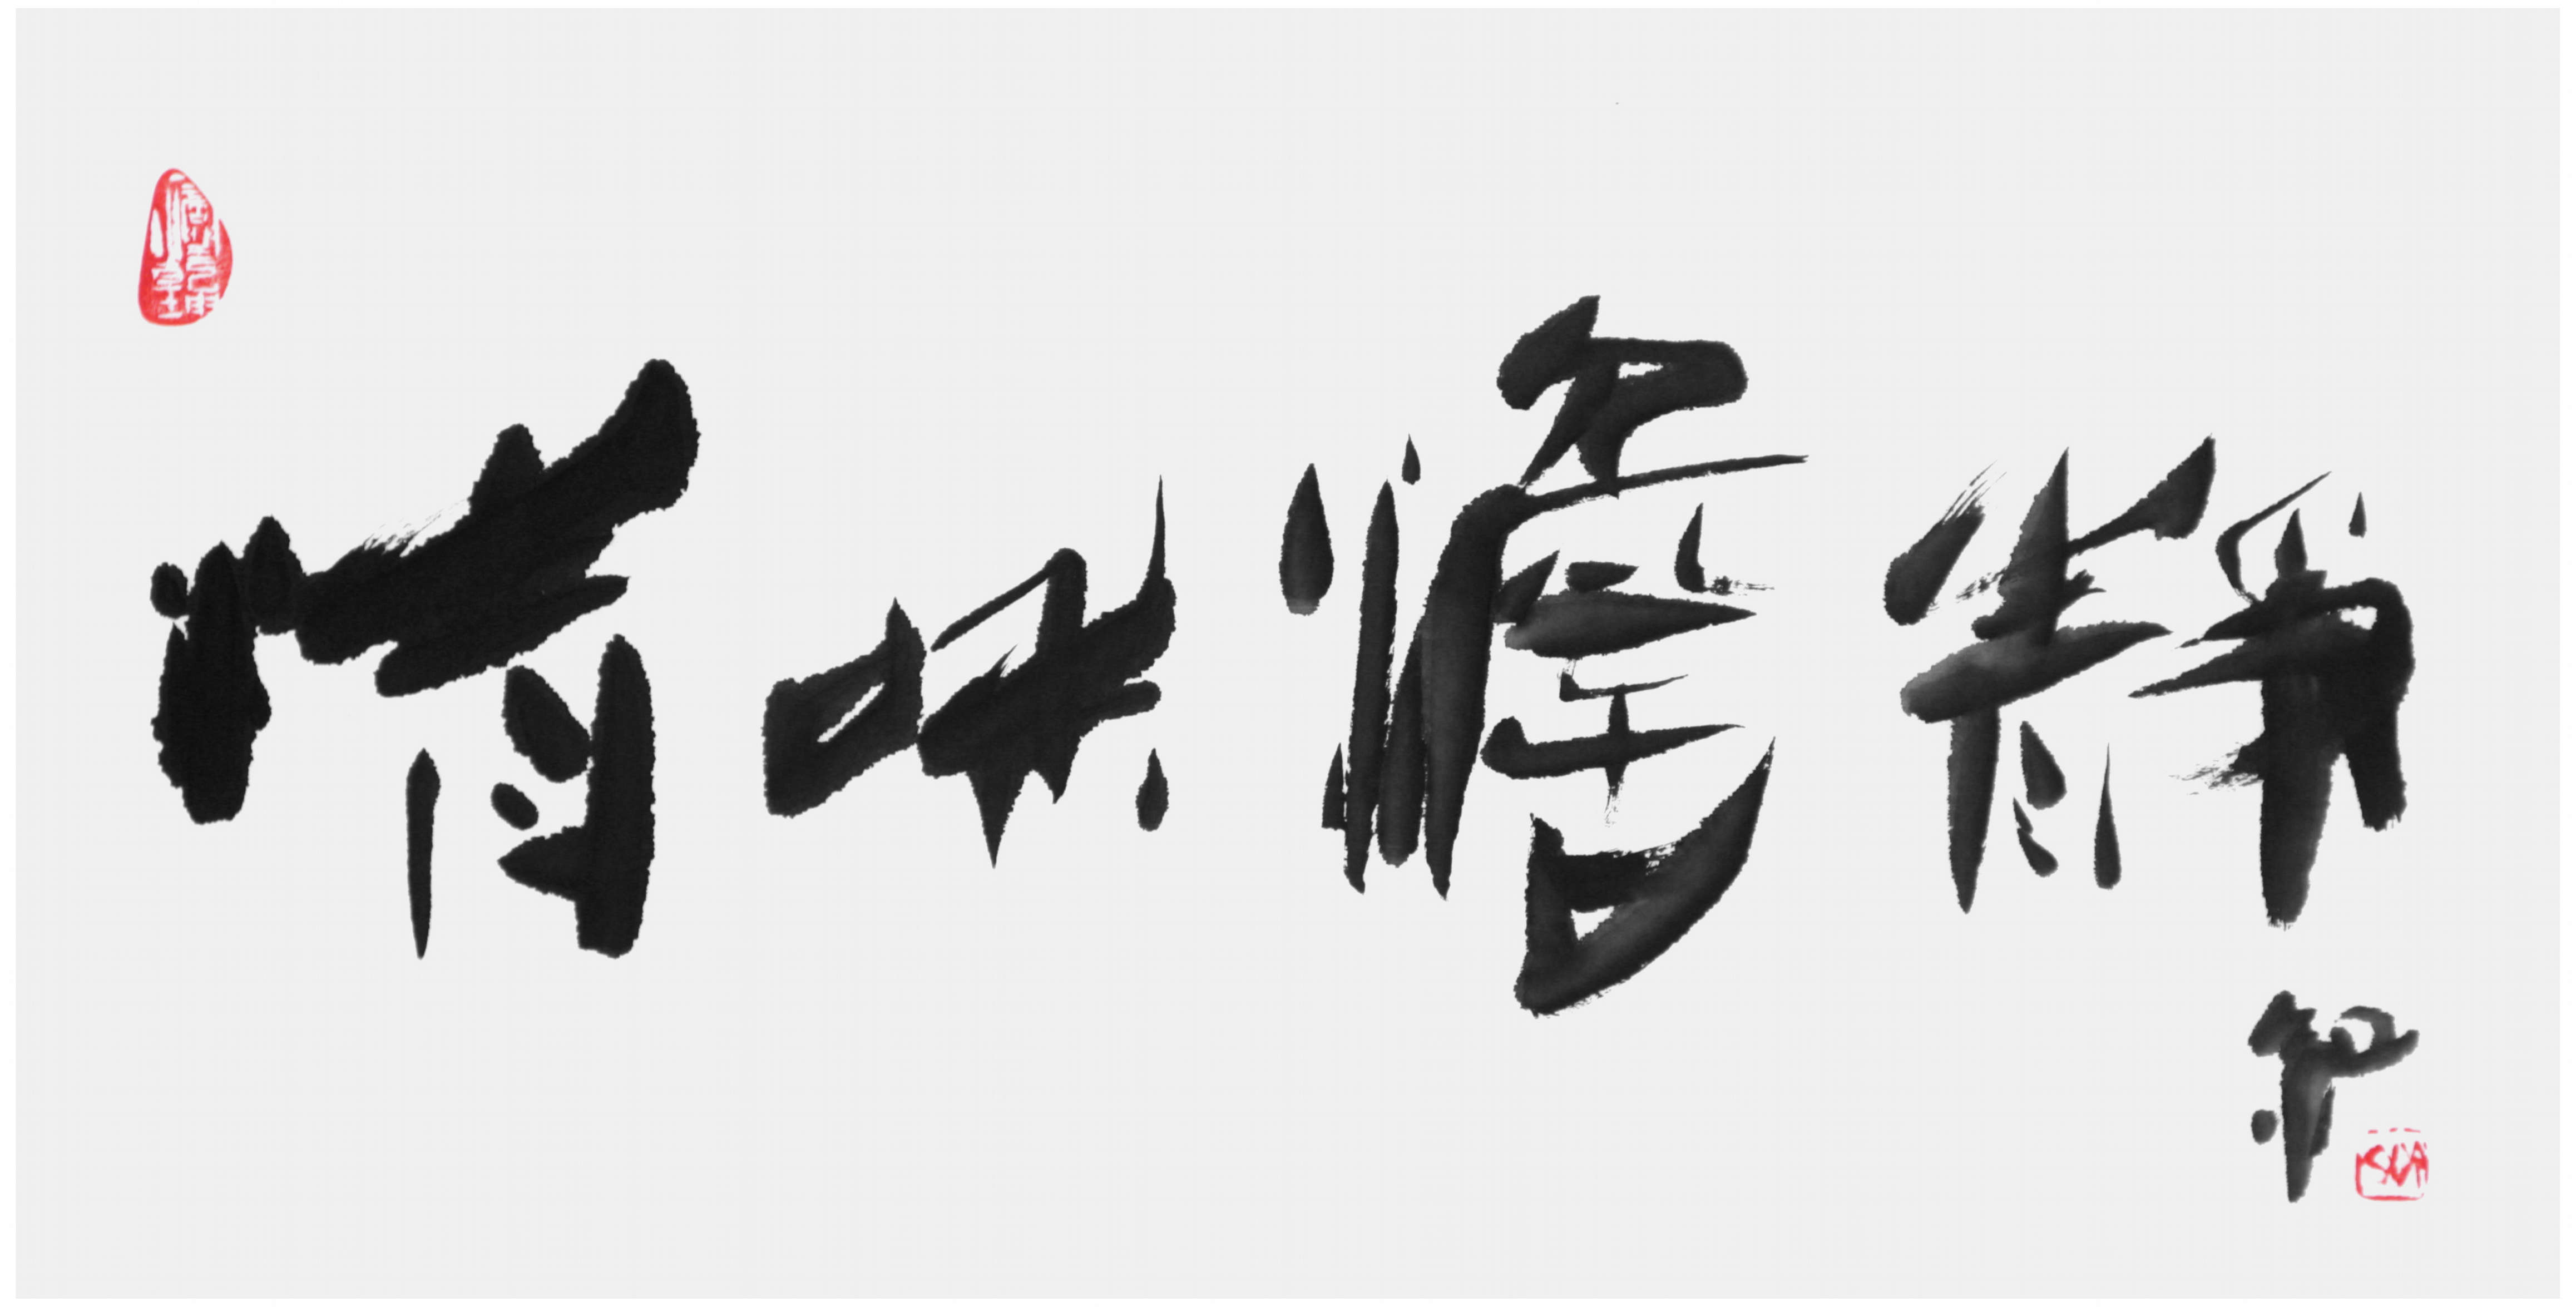 Qi Hong (Sai Koh) 's freehand brushwork style semi-seal script Chinese calligraphy, Tea may be of Purity, Harmony, Peace and Pranquility 3, 69×34cm, Ink - Qi Hong (Sai Koh) Calligraphy Web